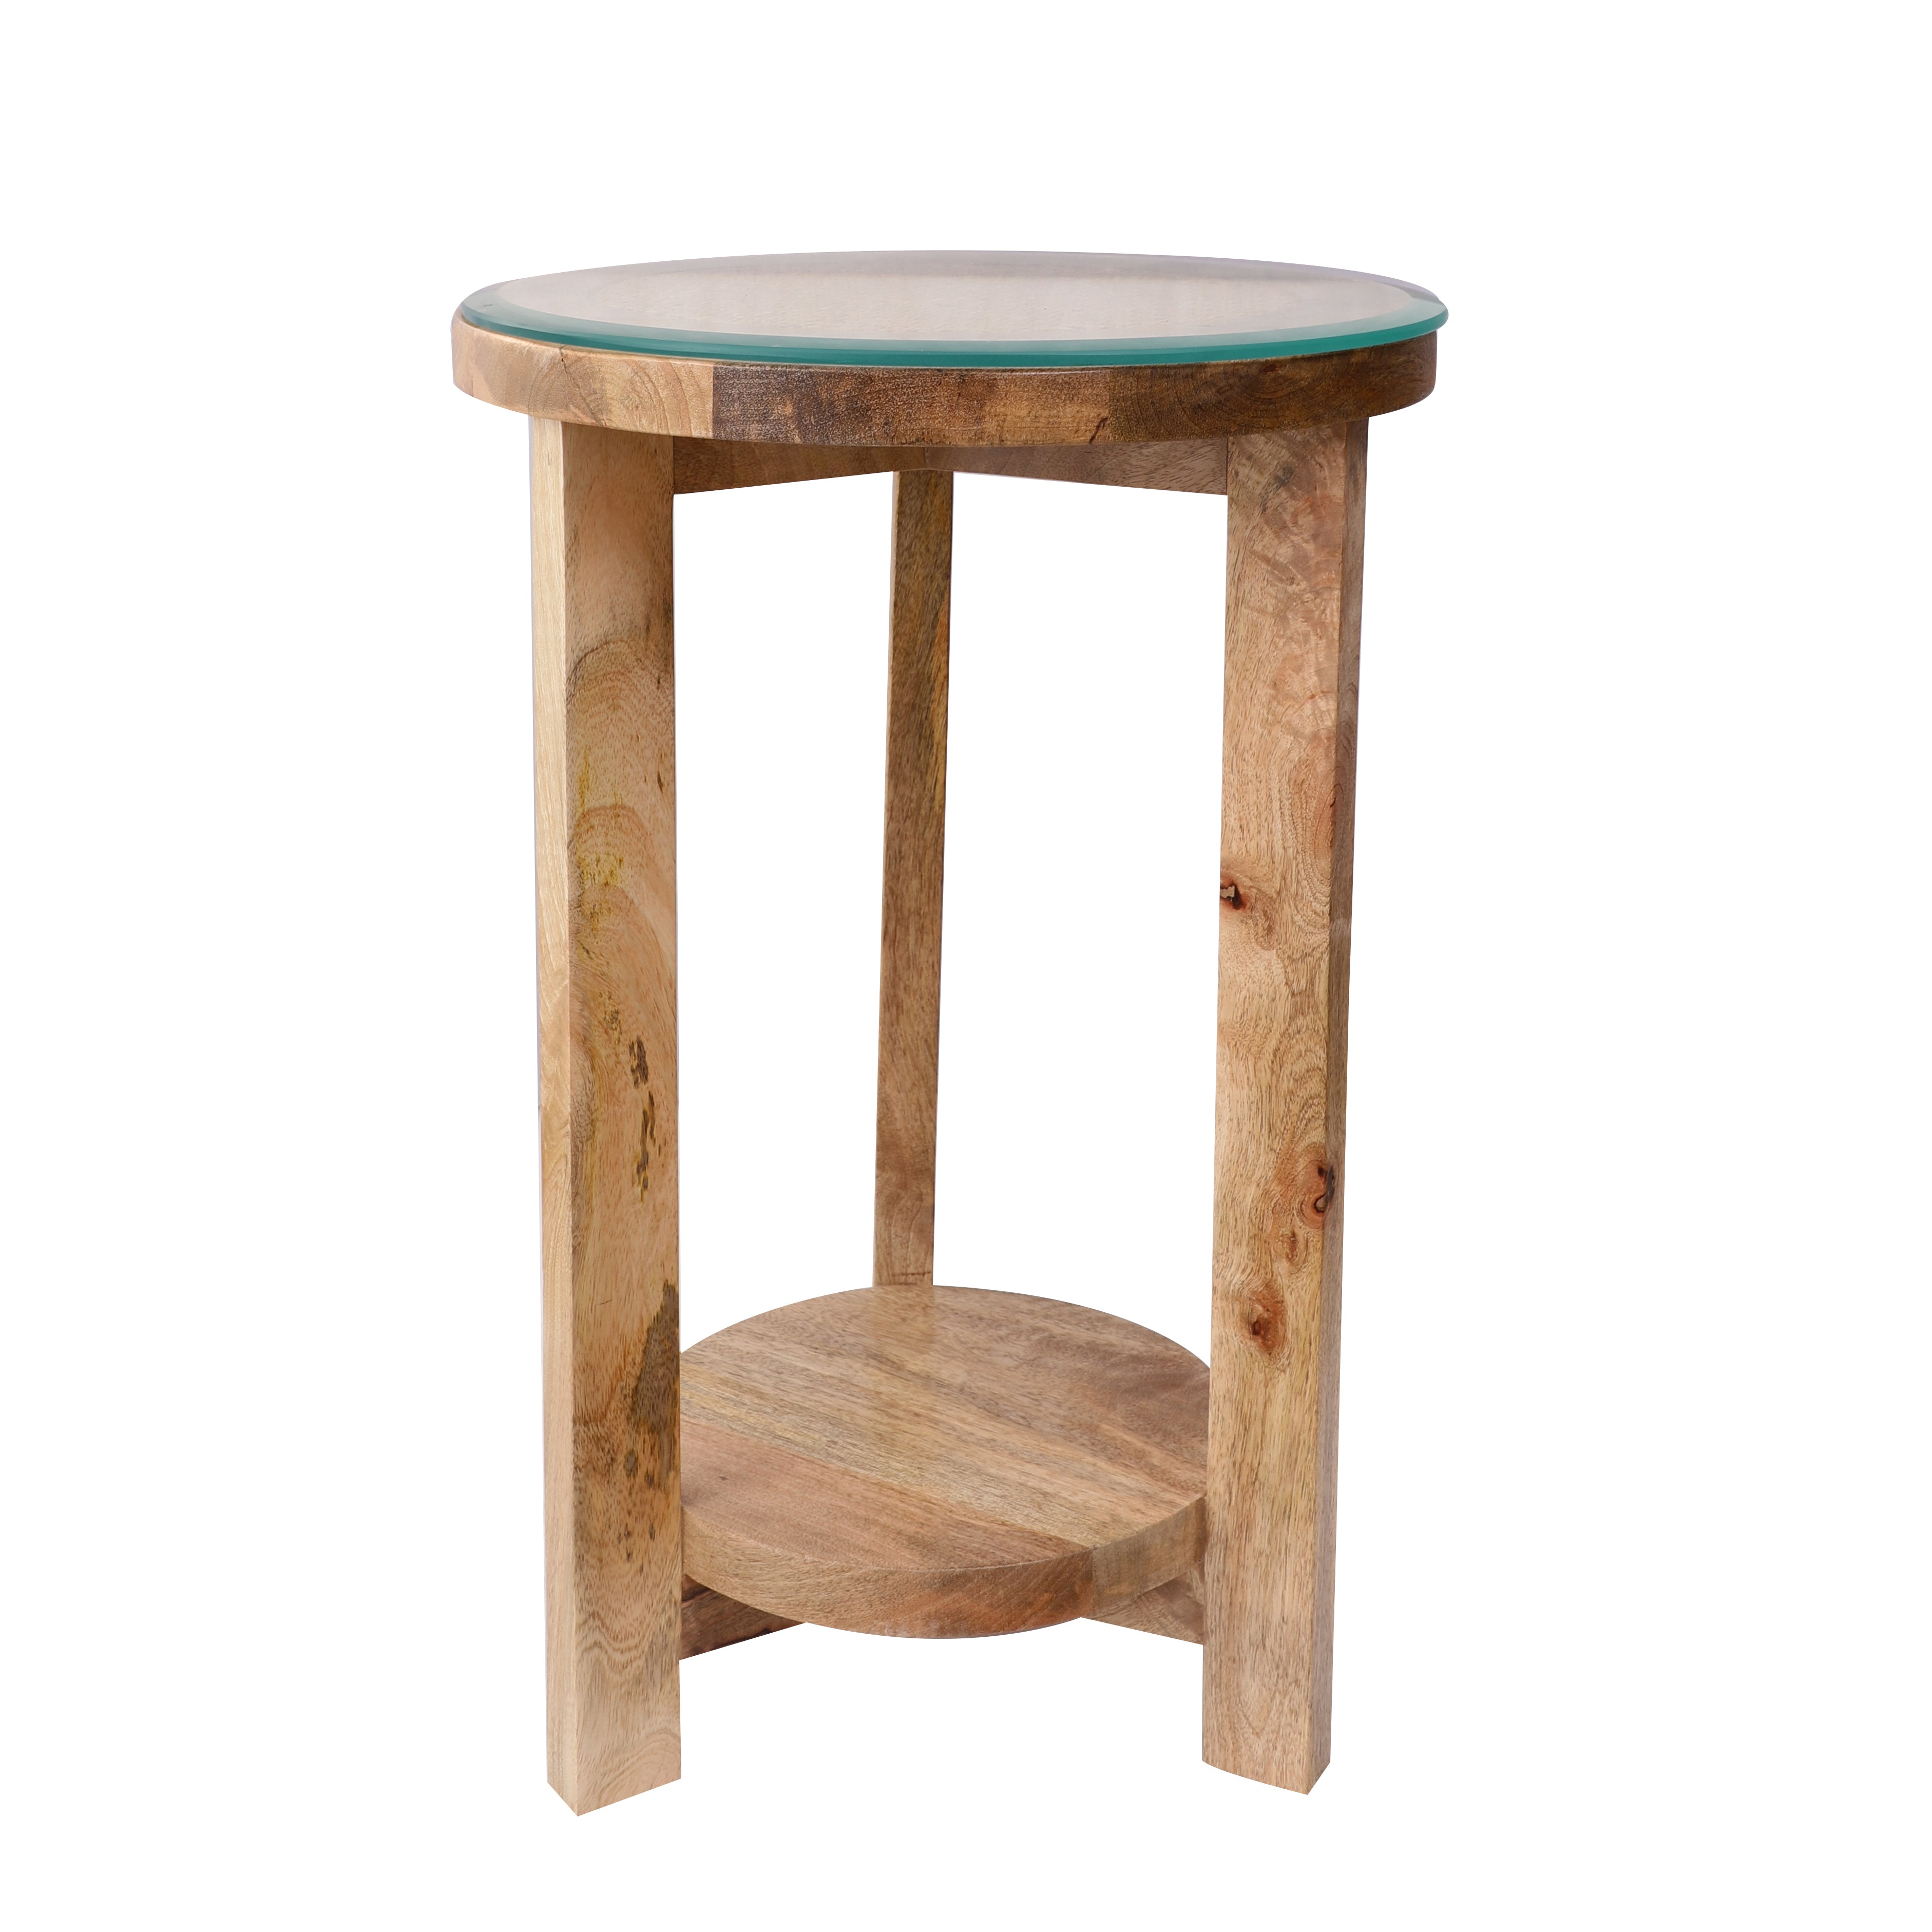 Cane Glass Top Wooden Side Table